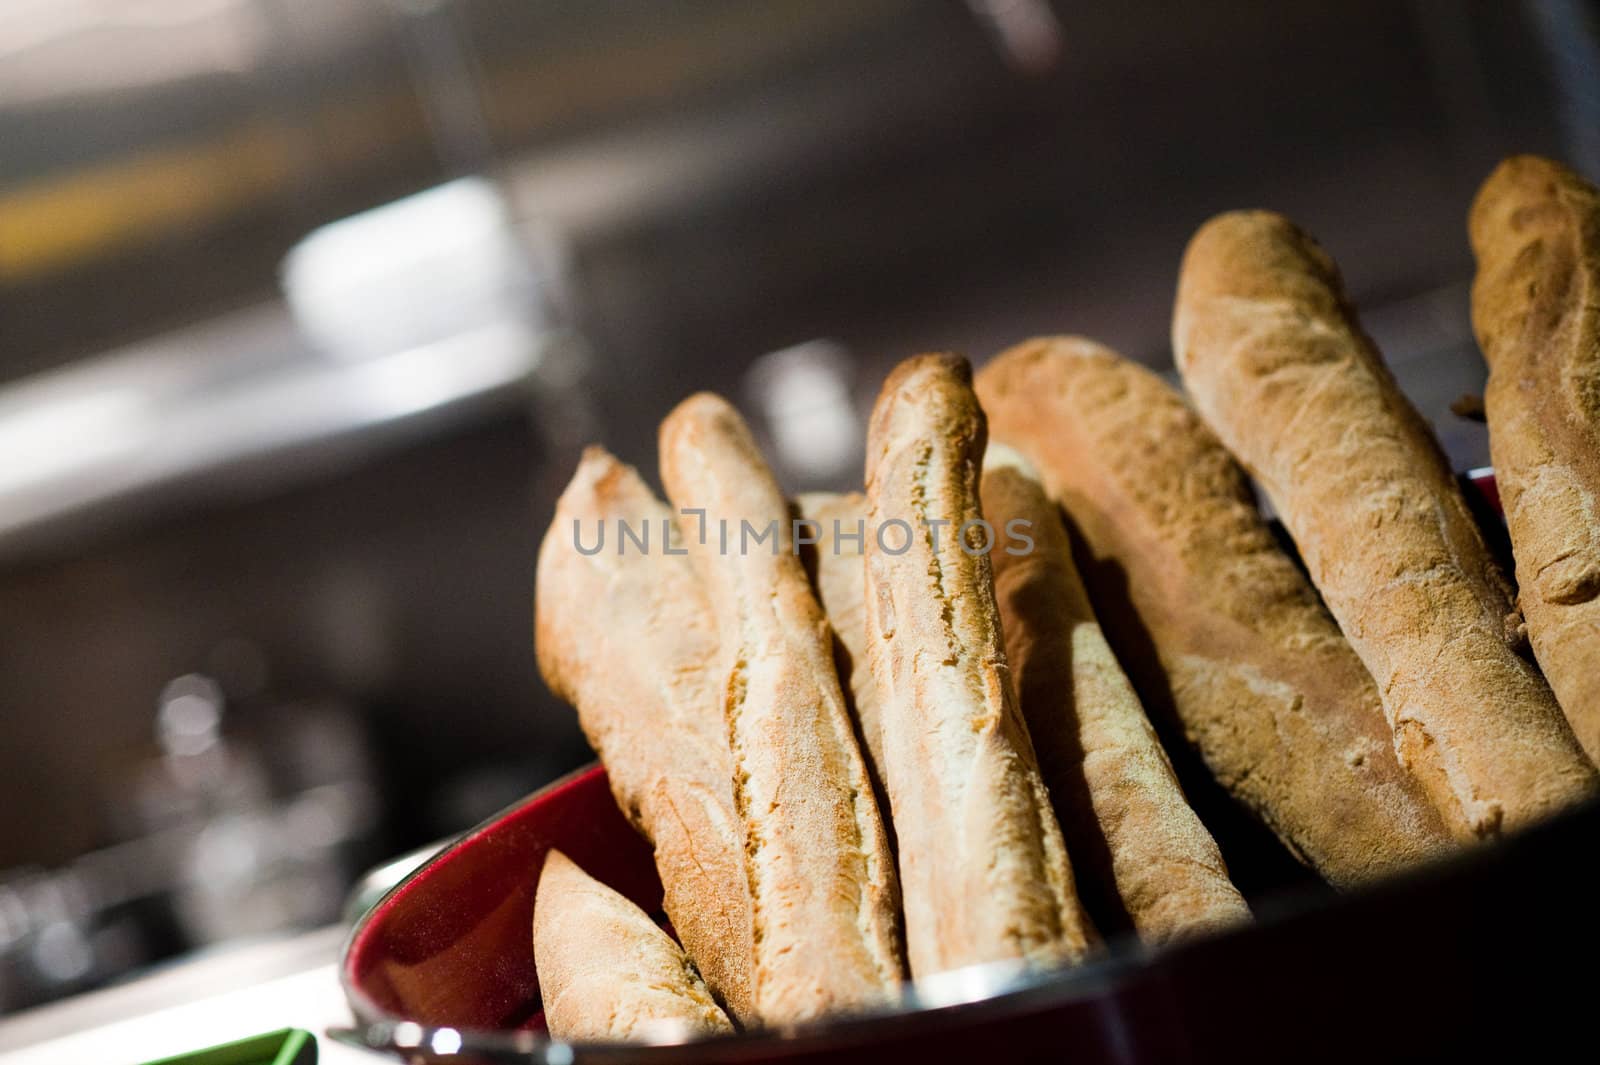 Baguettes in a restaurant kitchen by edan